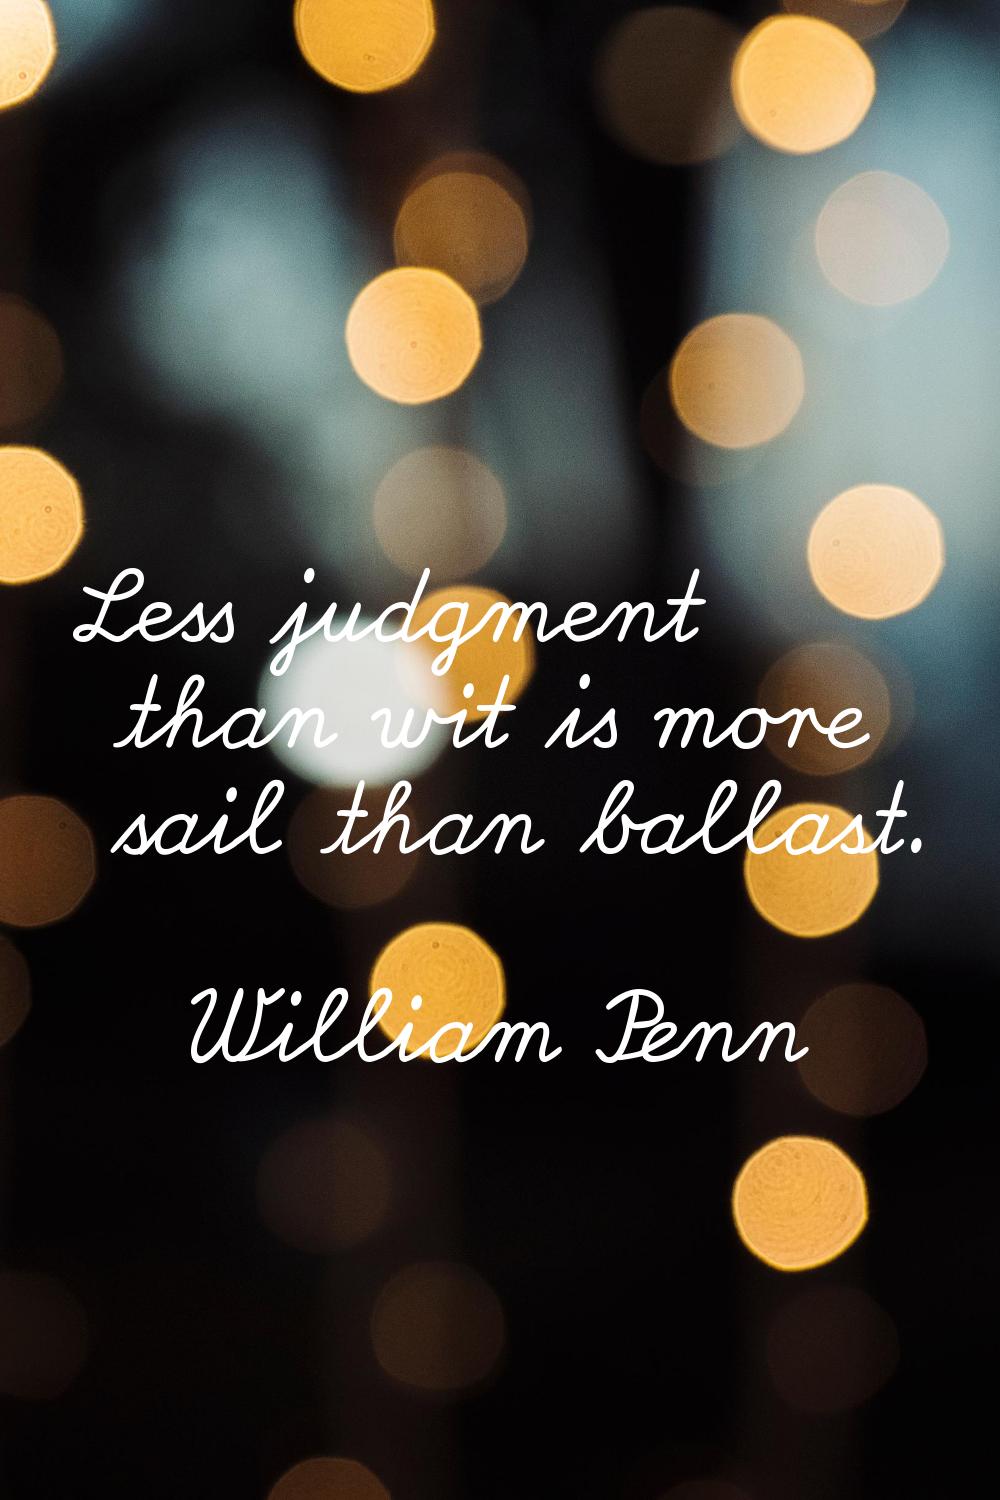 Less judgment than wit is more sail than ballast.